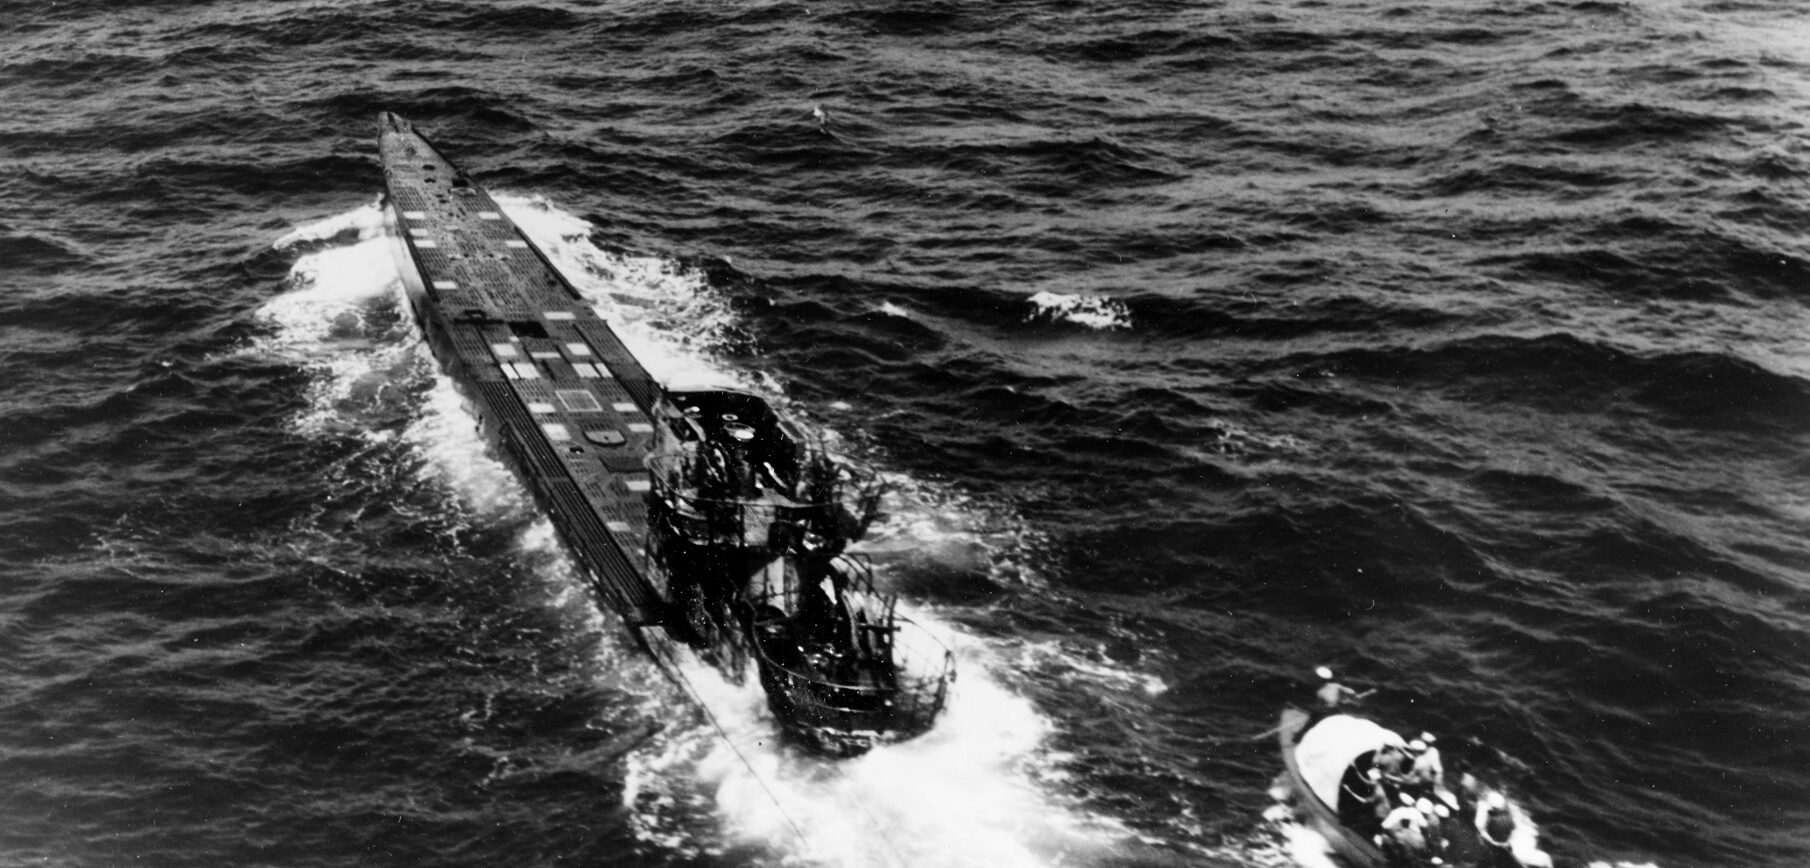 Despite the risk of U-505 being scuttled and blowing up, a boarding party from USS Pillsbury approaches the abandoned submarine, which is still underway. The Germans had intended to follow their abandonment doctrine and sink U-505 before it could be boarded.